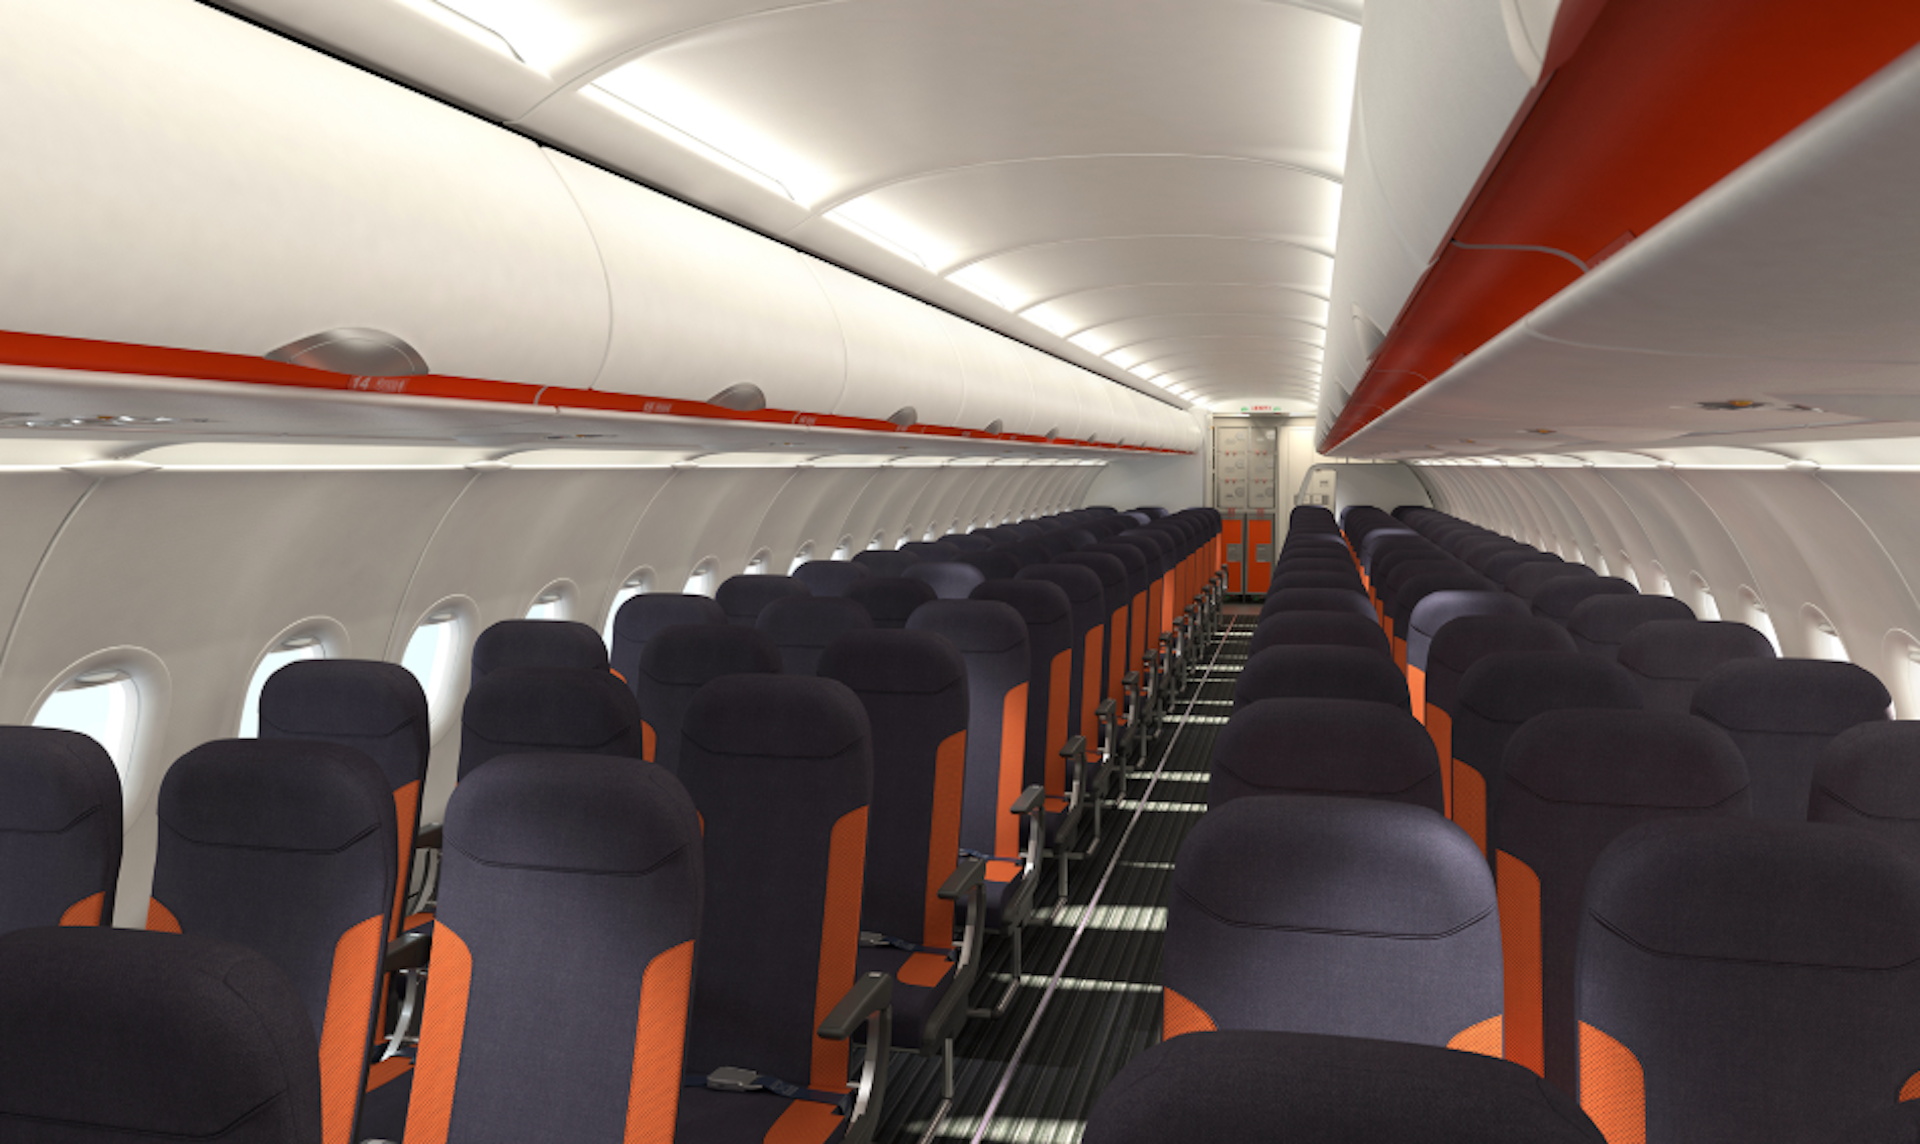 The front of an A320 EasyJet 1920. There are chairs in rows of three, with an isle in the middle. The chairs are black with an orange stripe. 